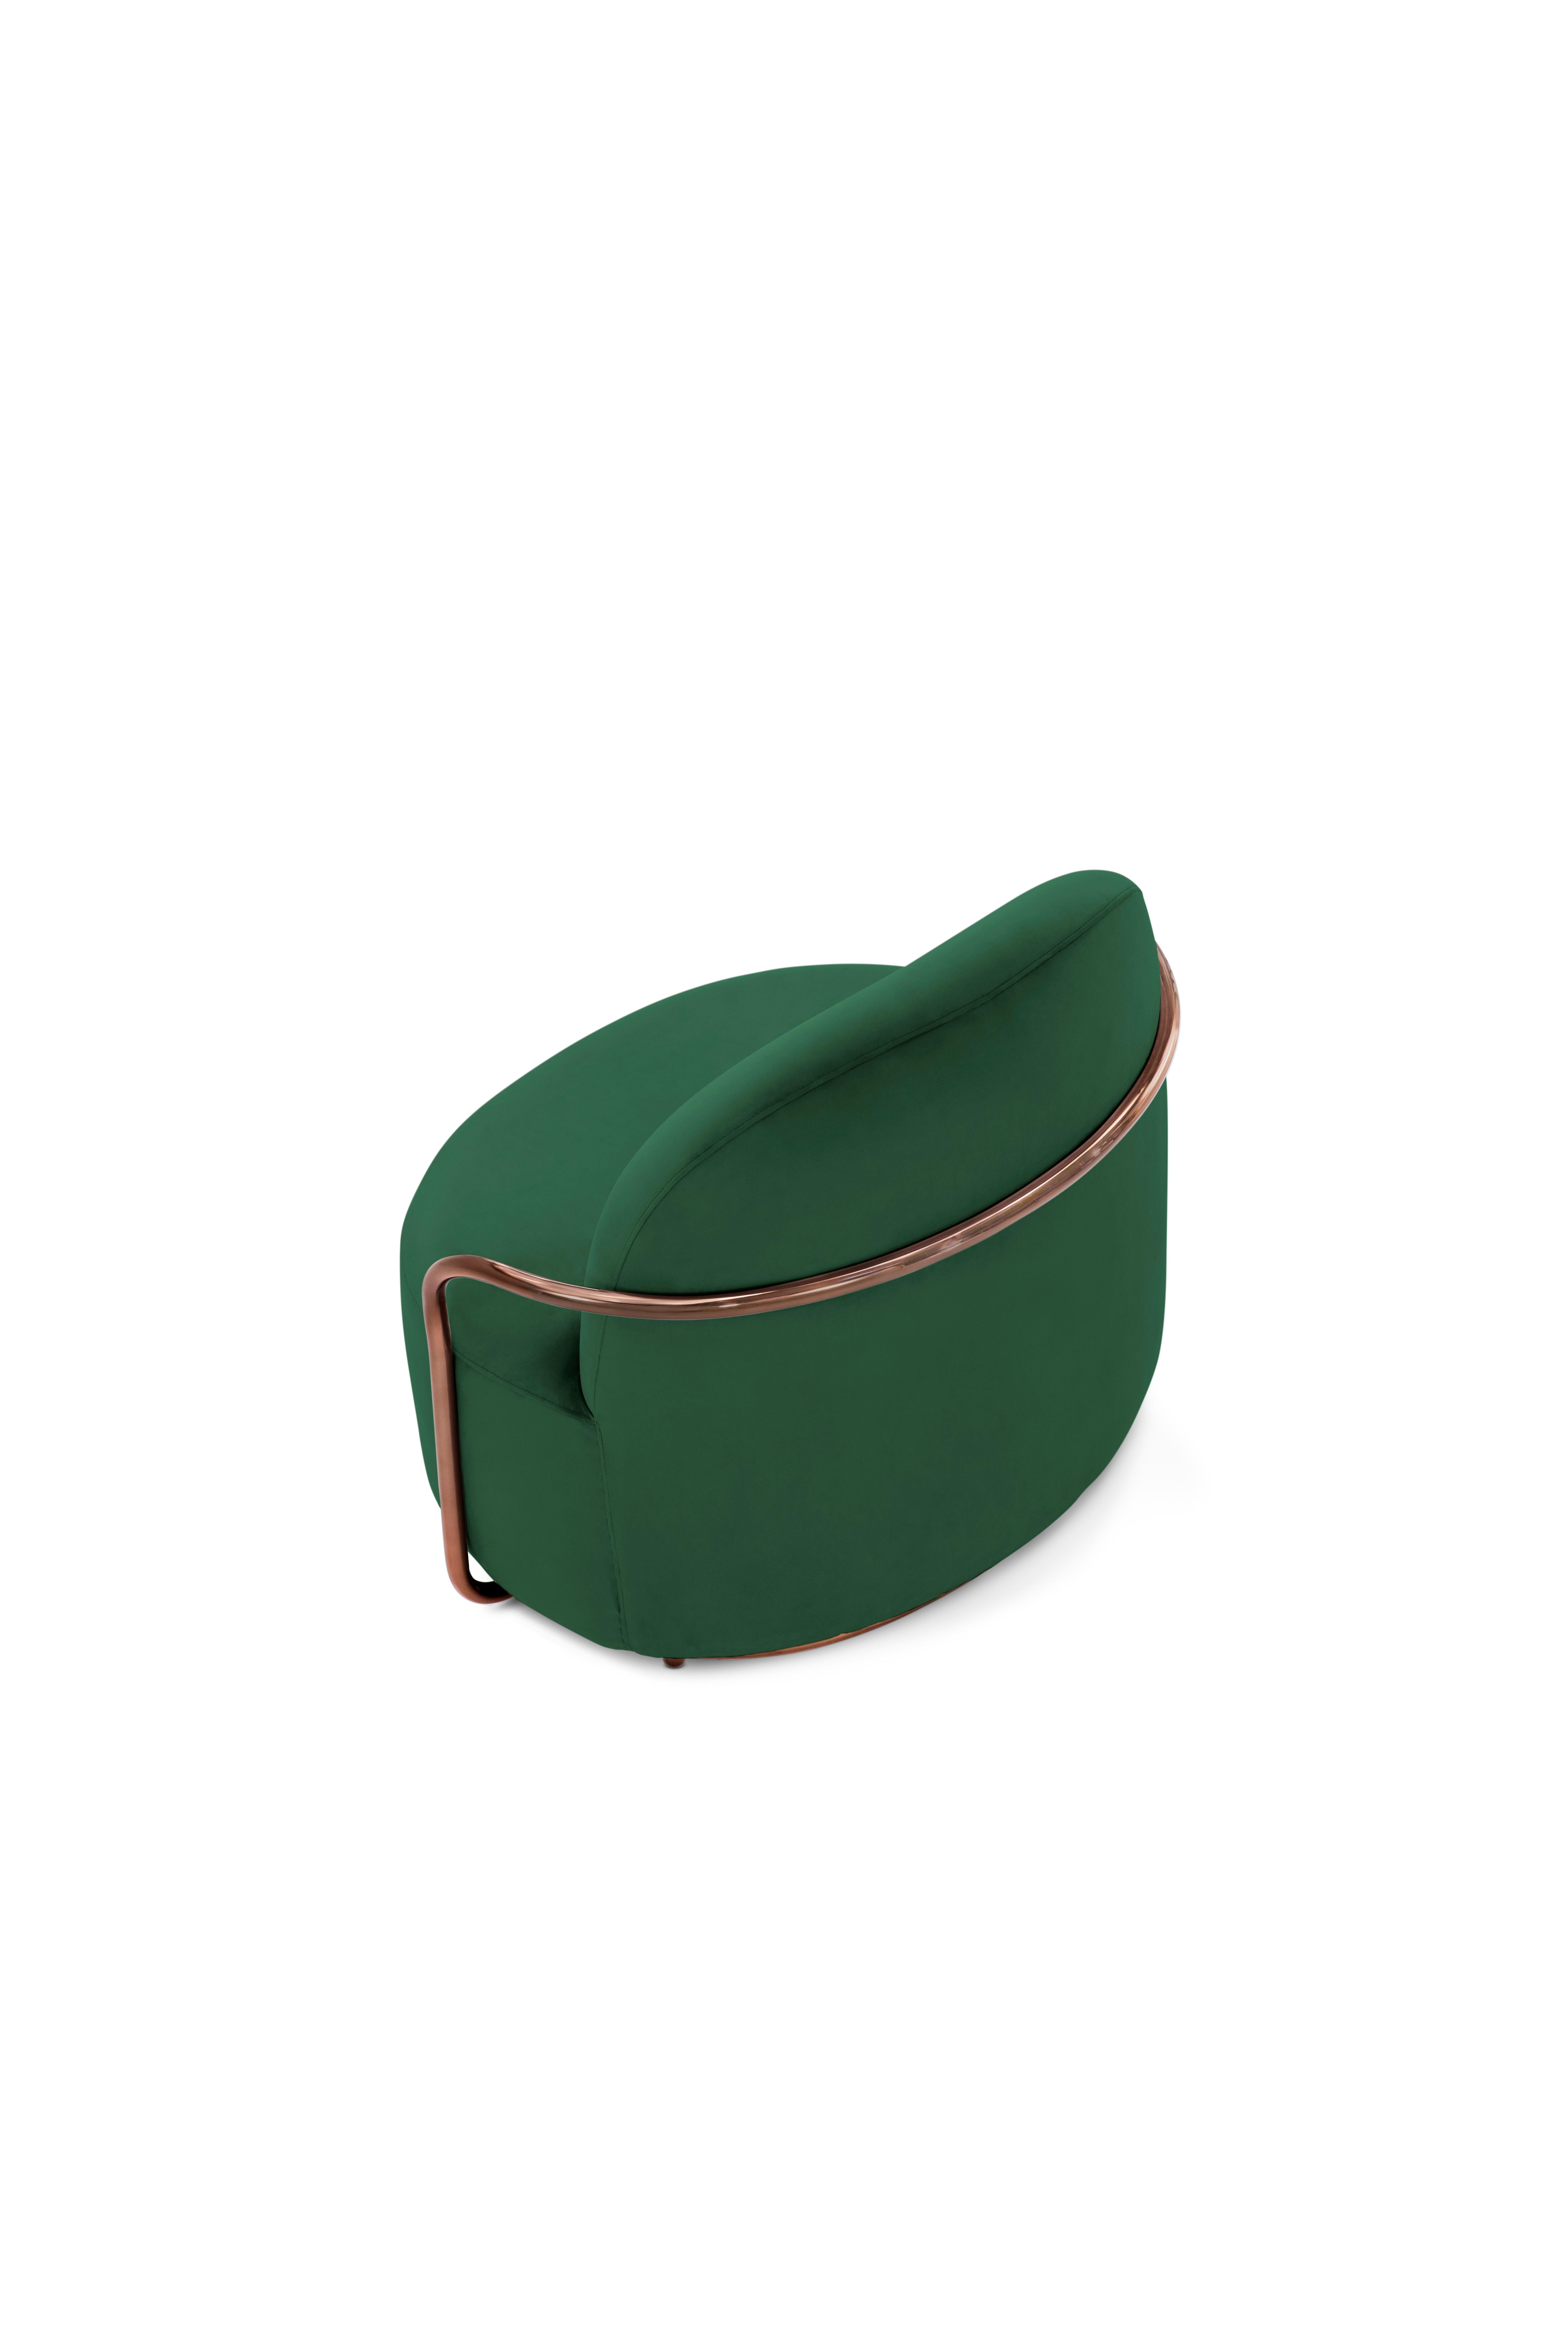 Indian Orion Lounge Chair with Plush Green Velvet and Rose Gold Arms by Nika Zupanc For Sale